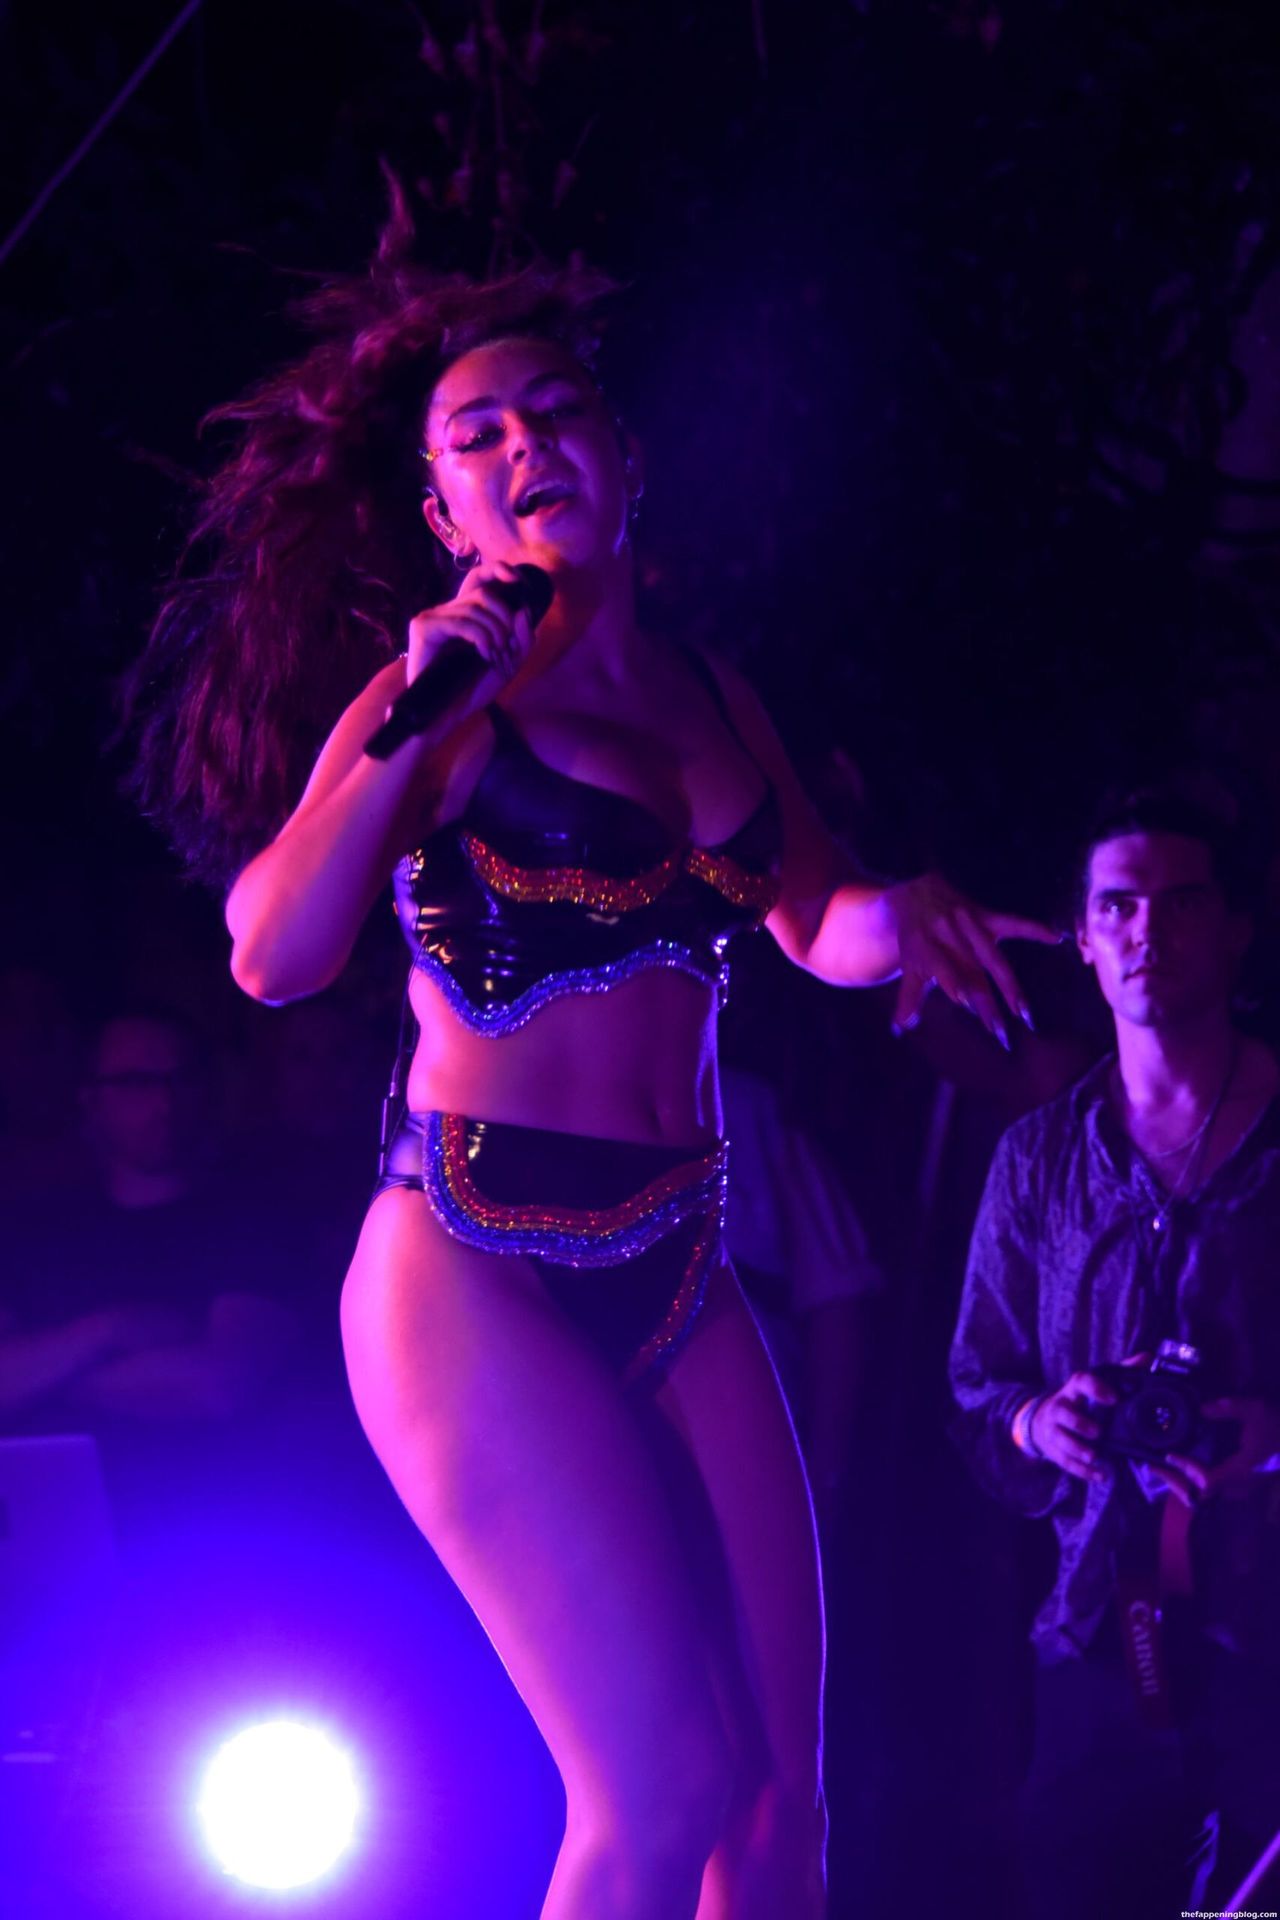 Charli-XCX-Sexy-on-Stage-8-thefappeningblog.com_.jpg